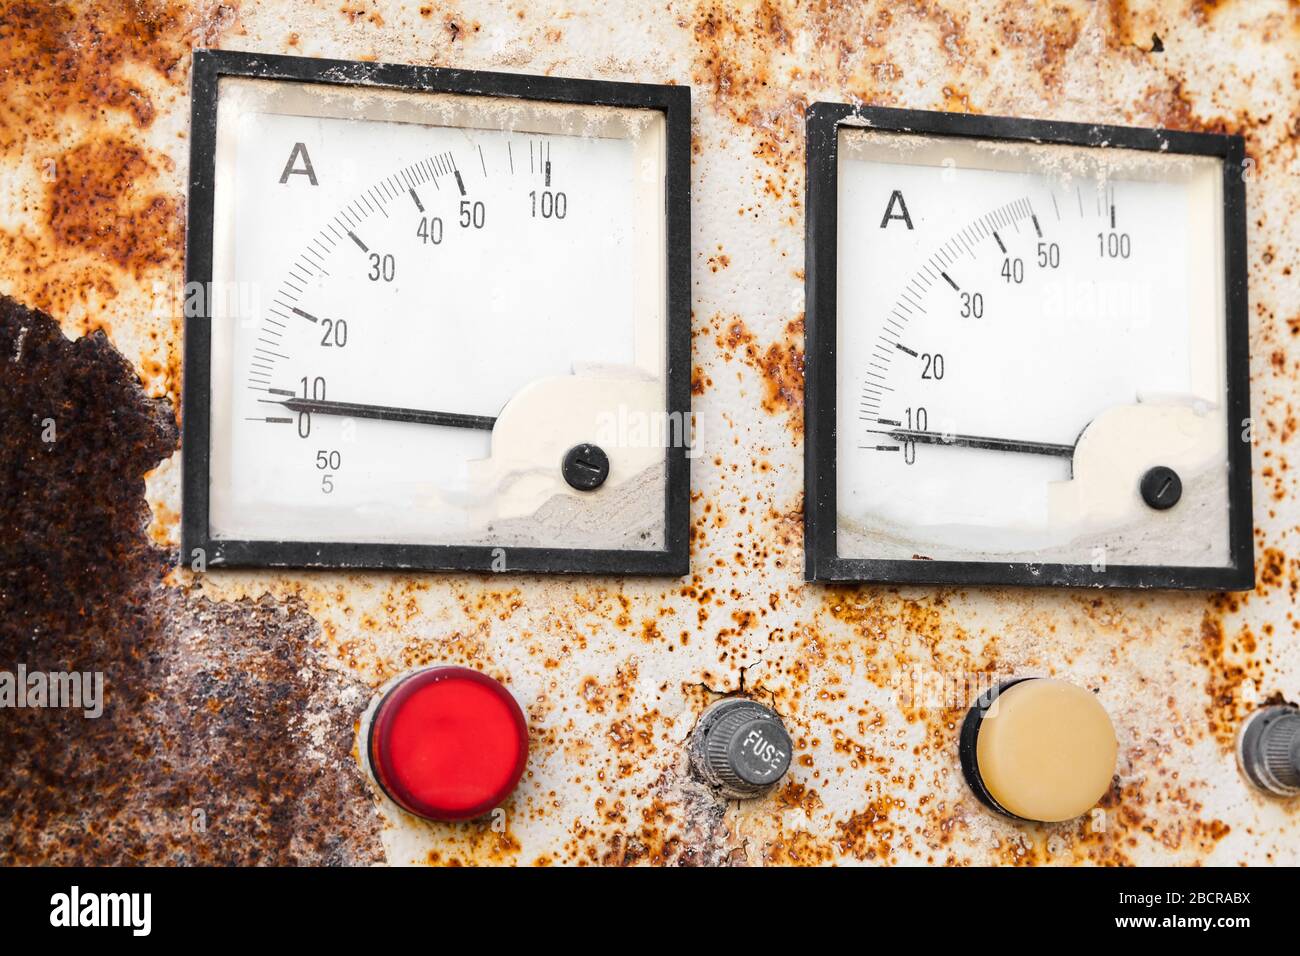 Two industrial square ammeters show zero power level, close up photo of a rusty old electric control panel Stock Photo